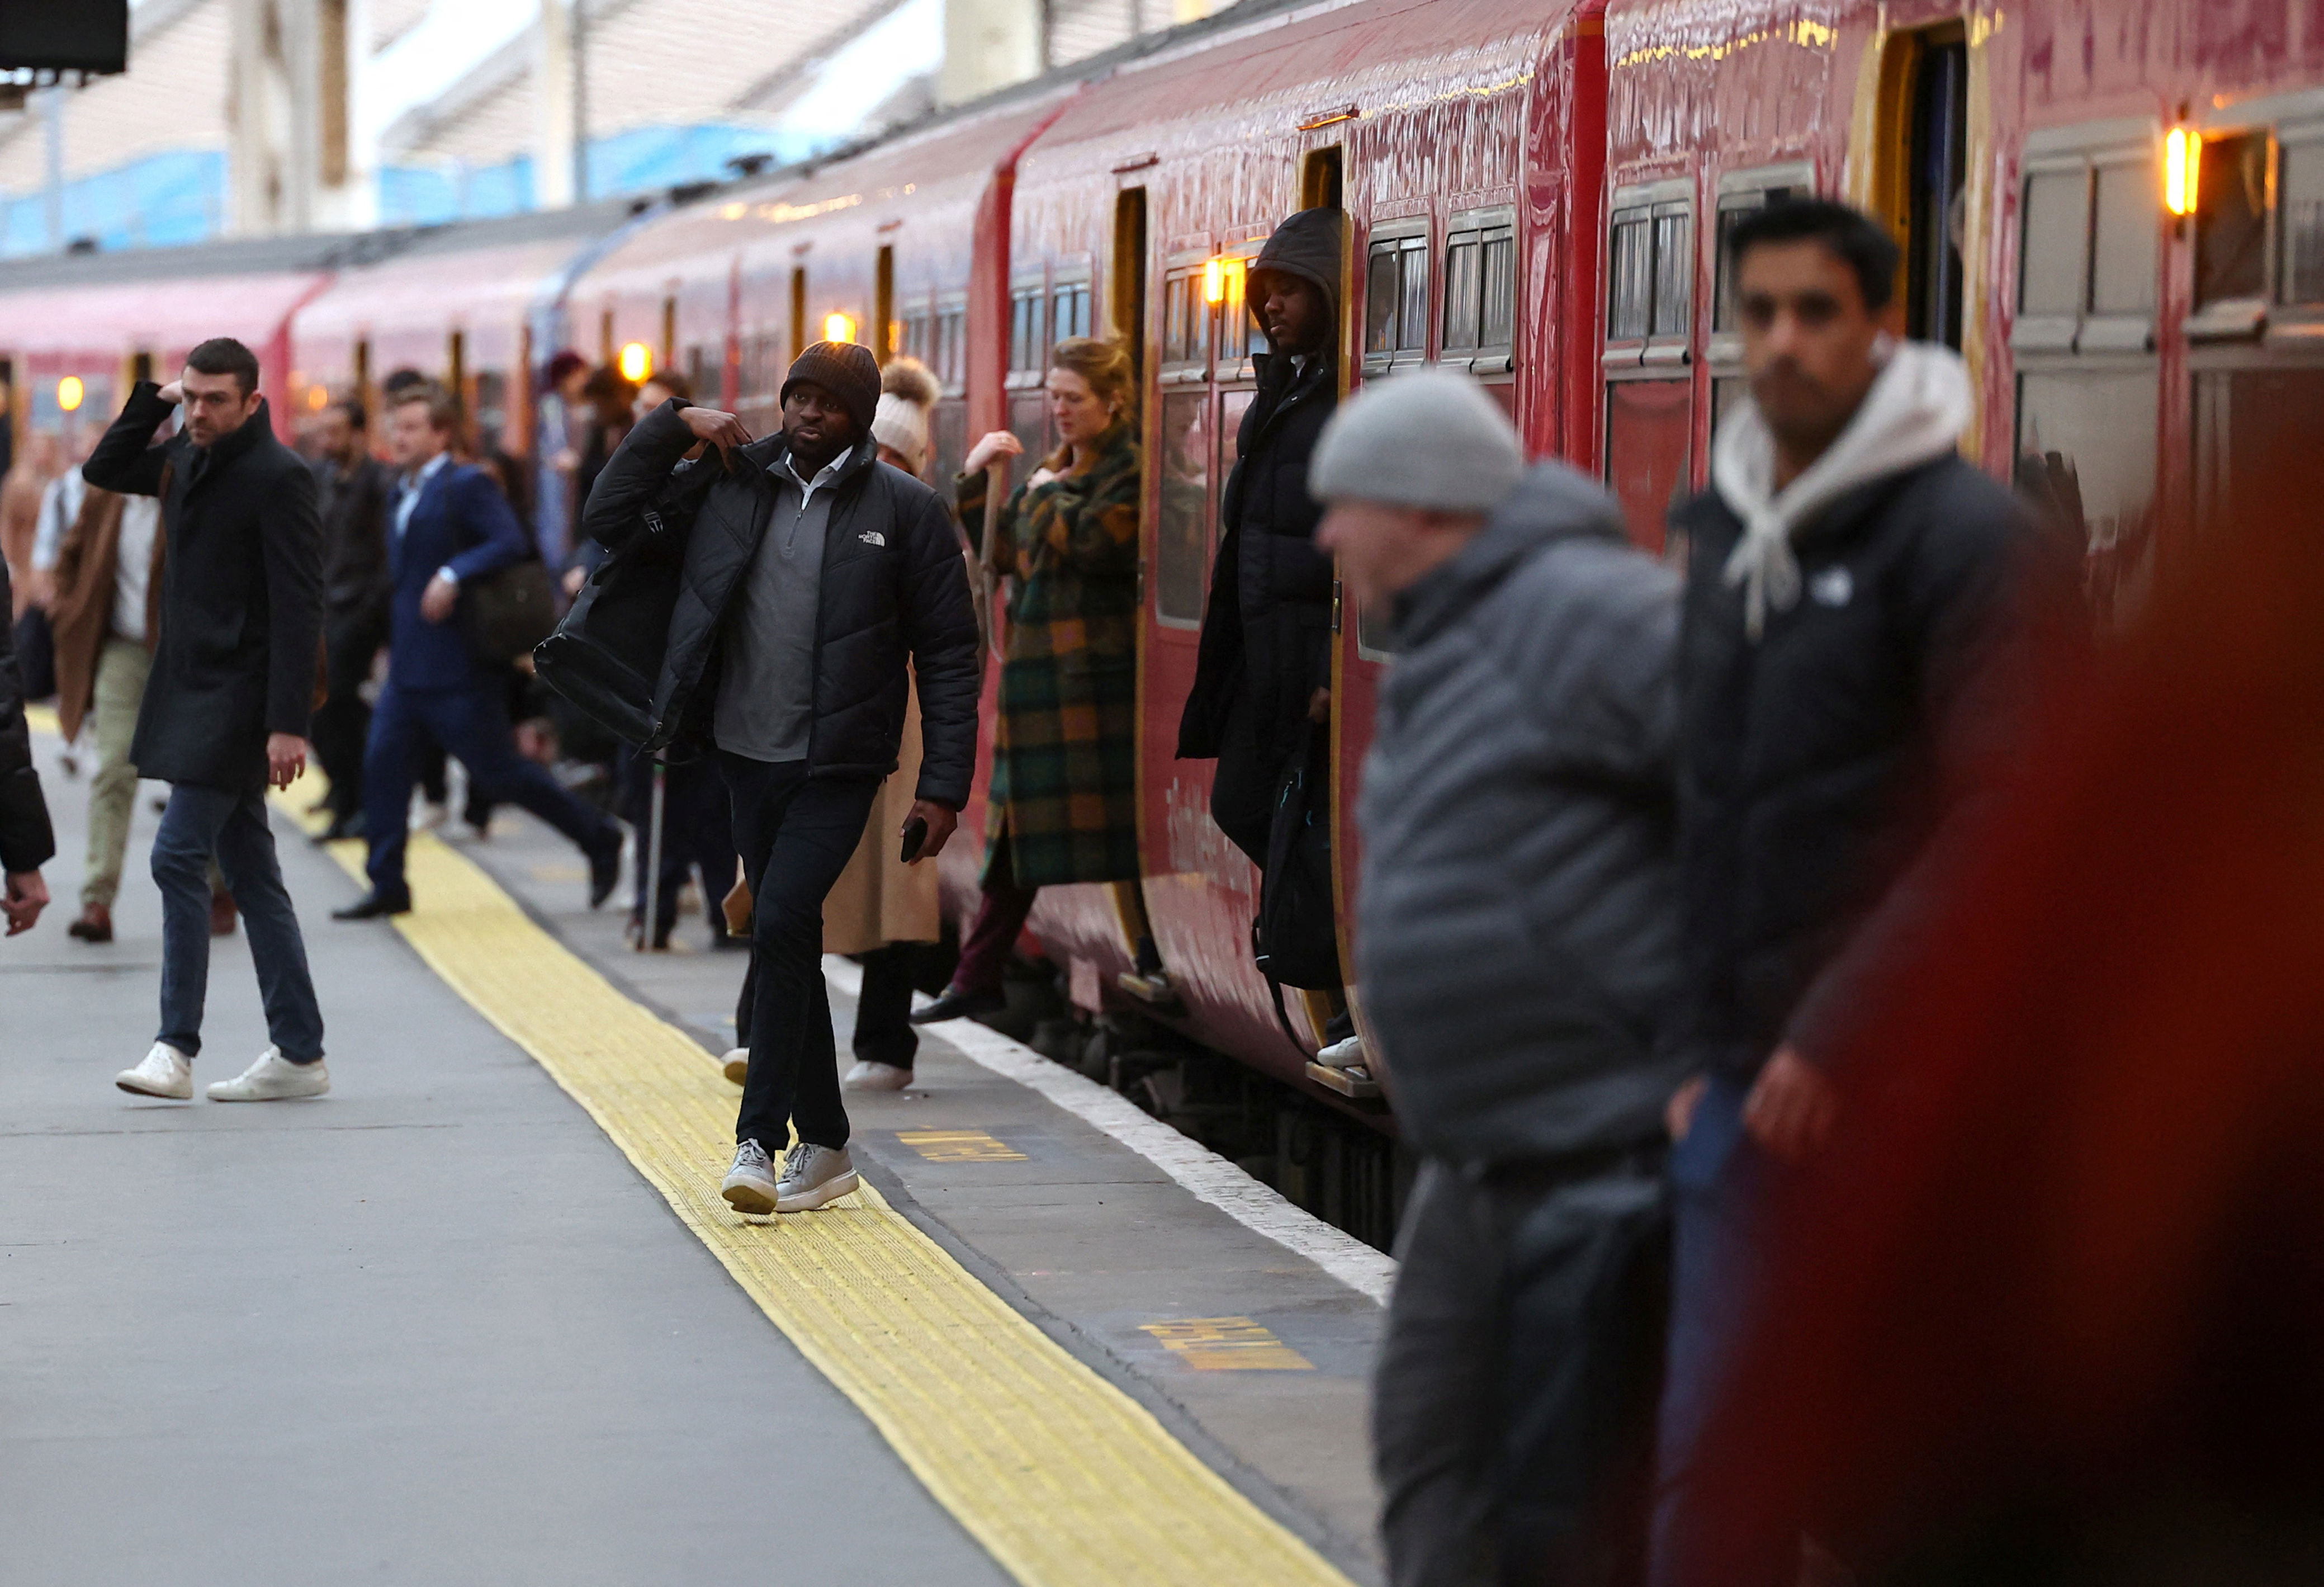 thousands of commuters stranded as one of uk’s busiest train lines blocked